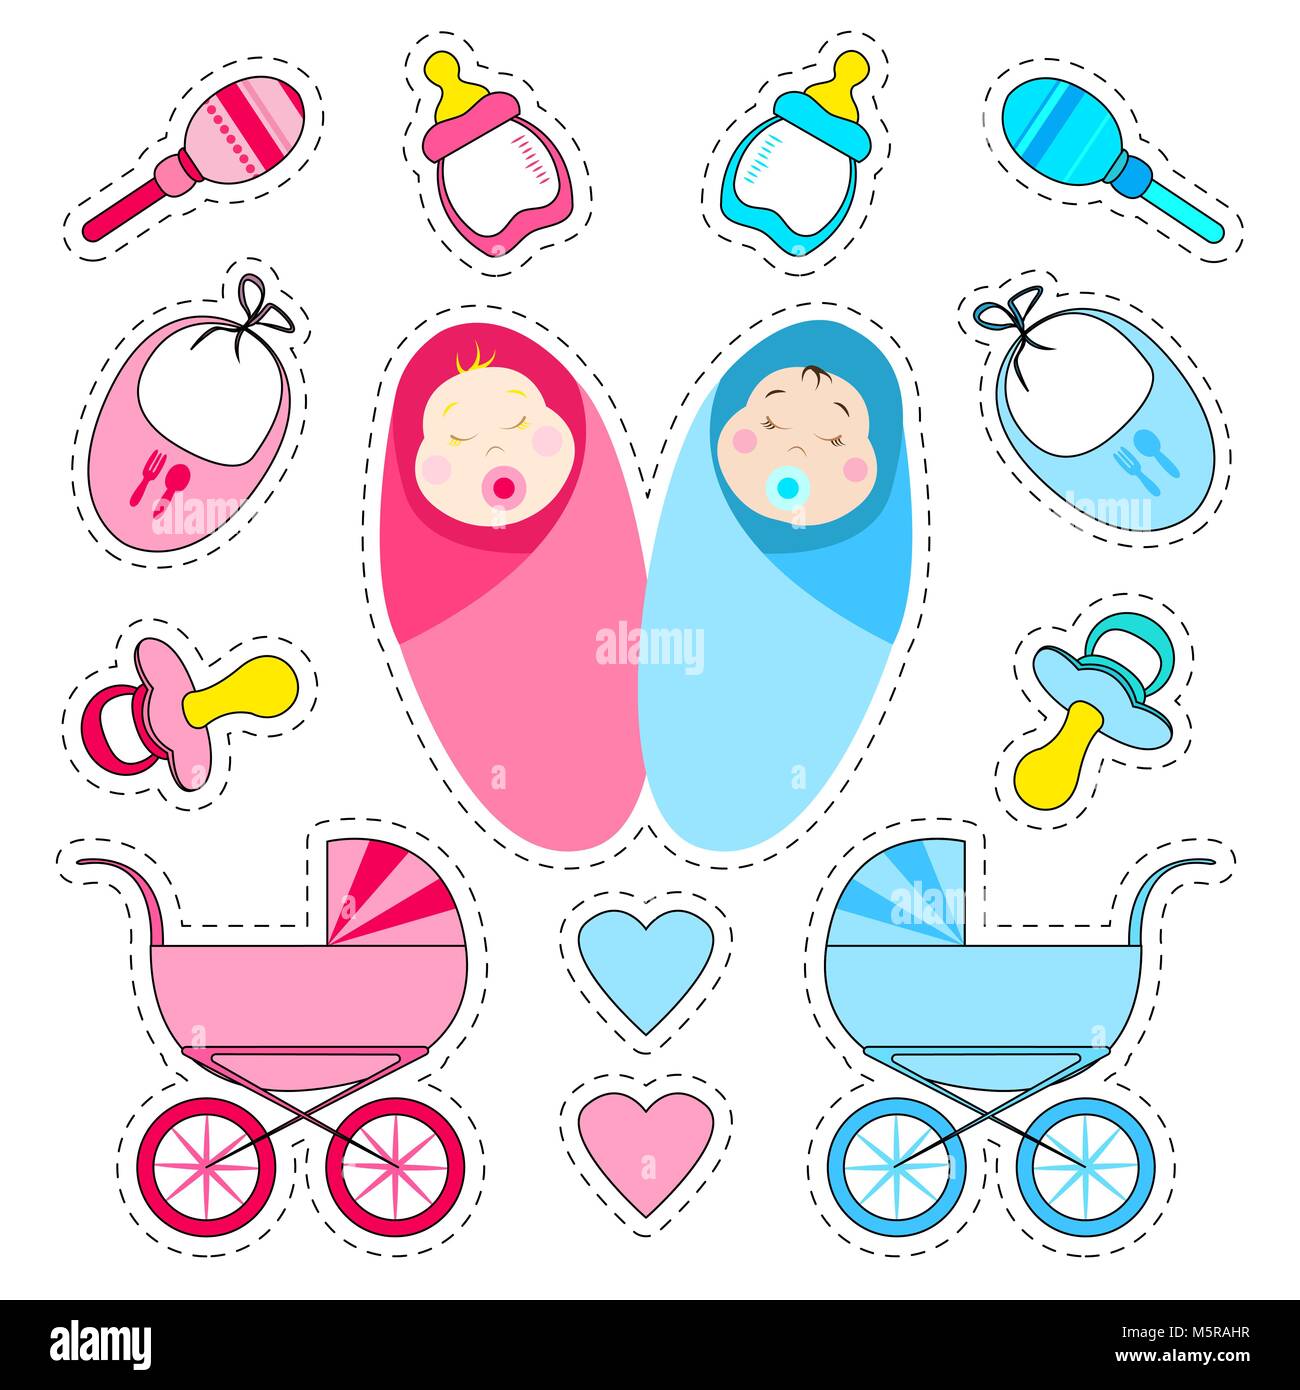 Stickers set for the birth of a child. Baby, nipple, baby bottle, stroller. Vector illustration. Stock Vector